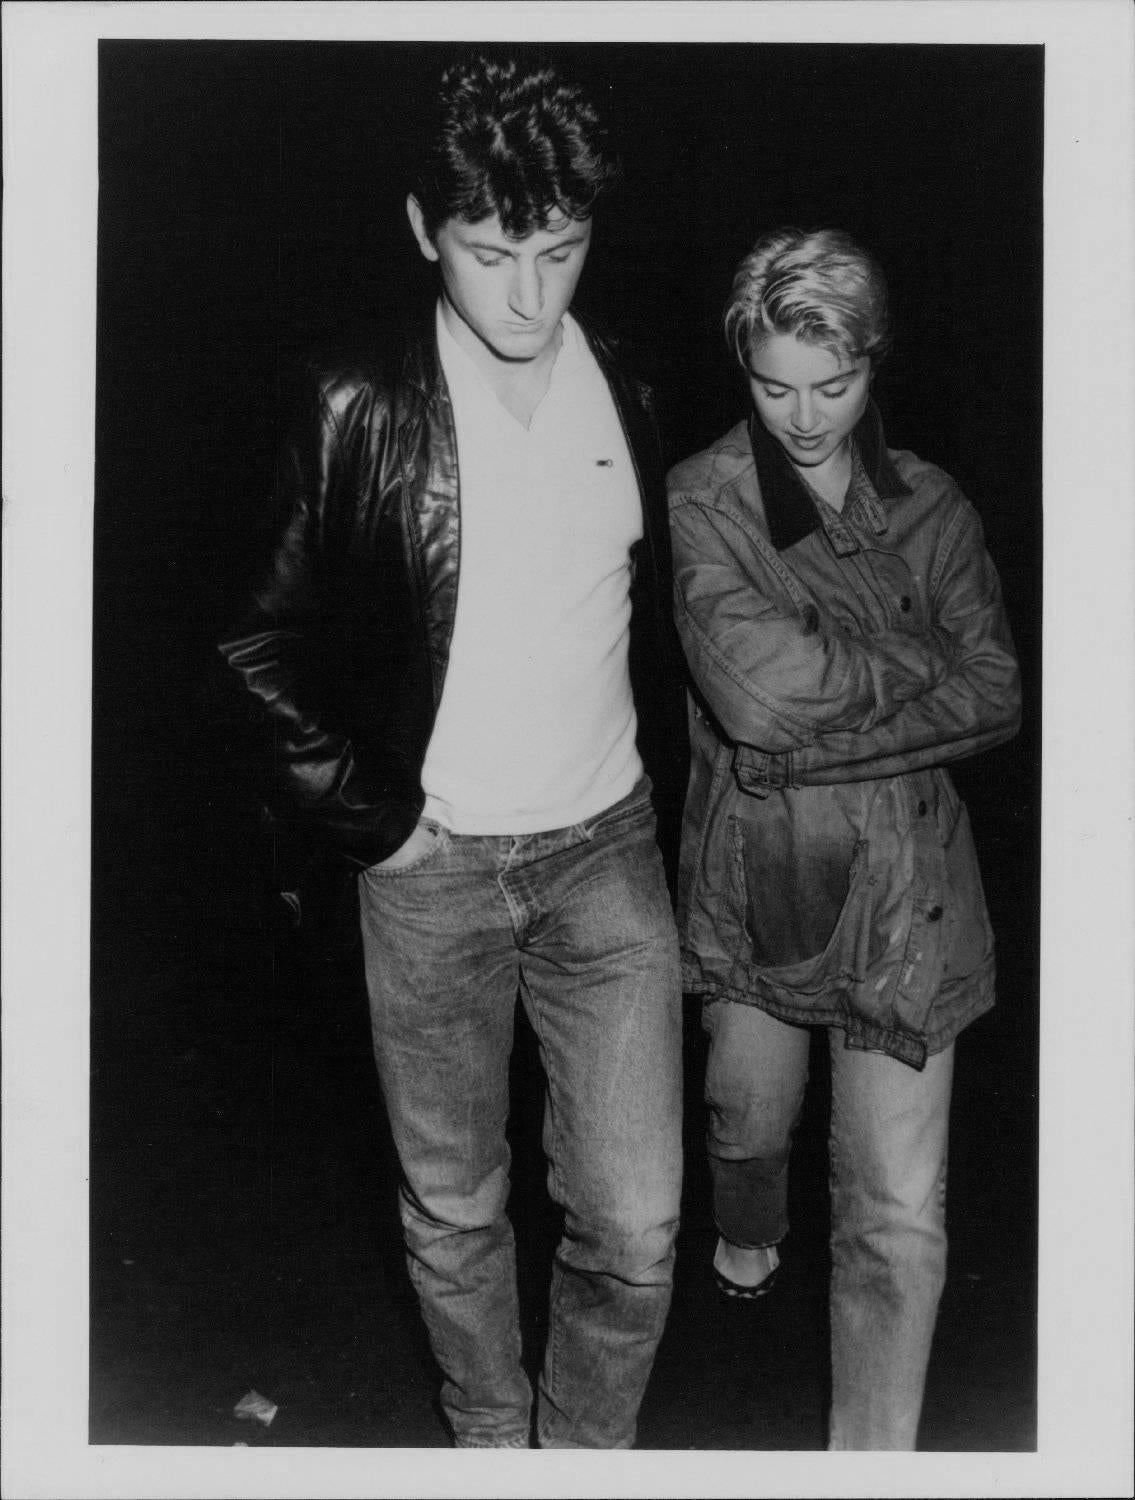 Unknown Black and White Photograph - Madonna and Sean Penn Vintage Original Photograph